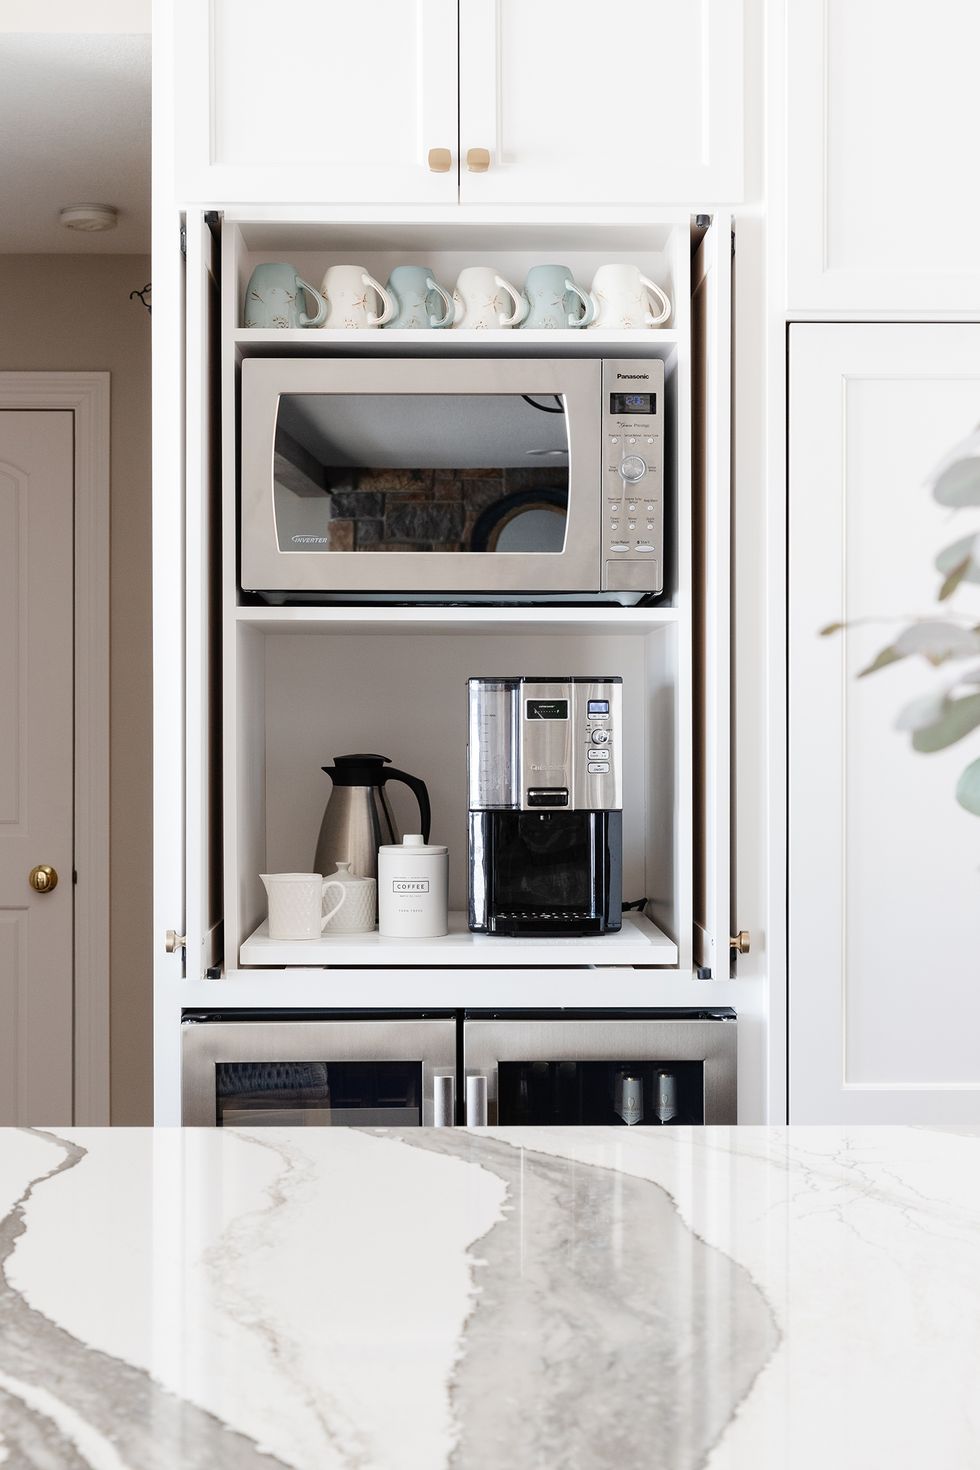 How to Set Up a Kitchen Coffee Station